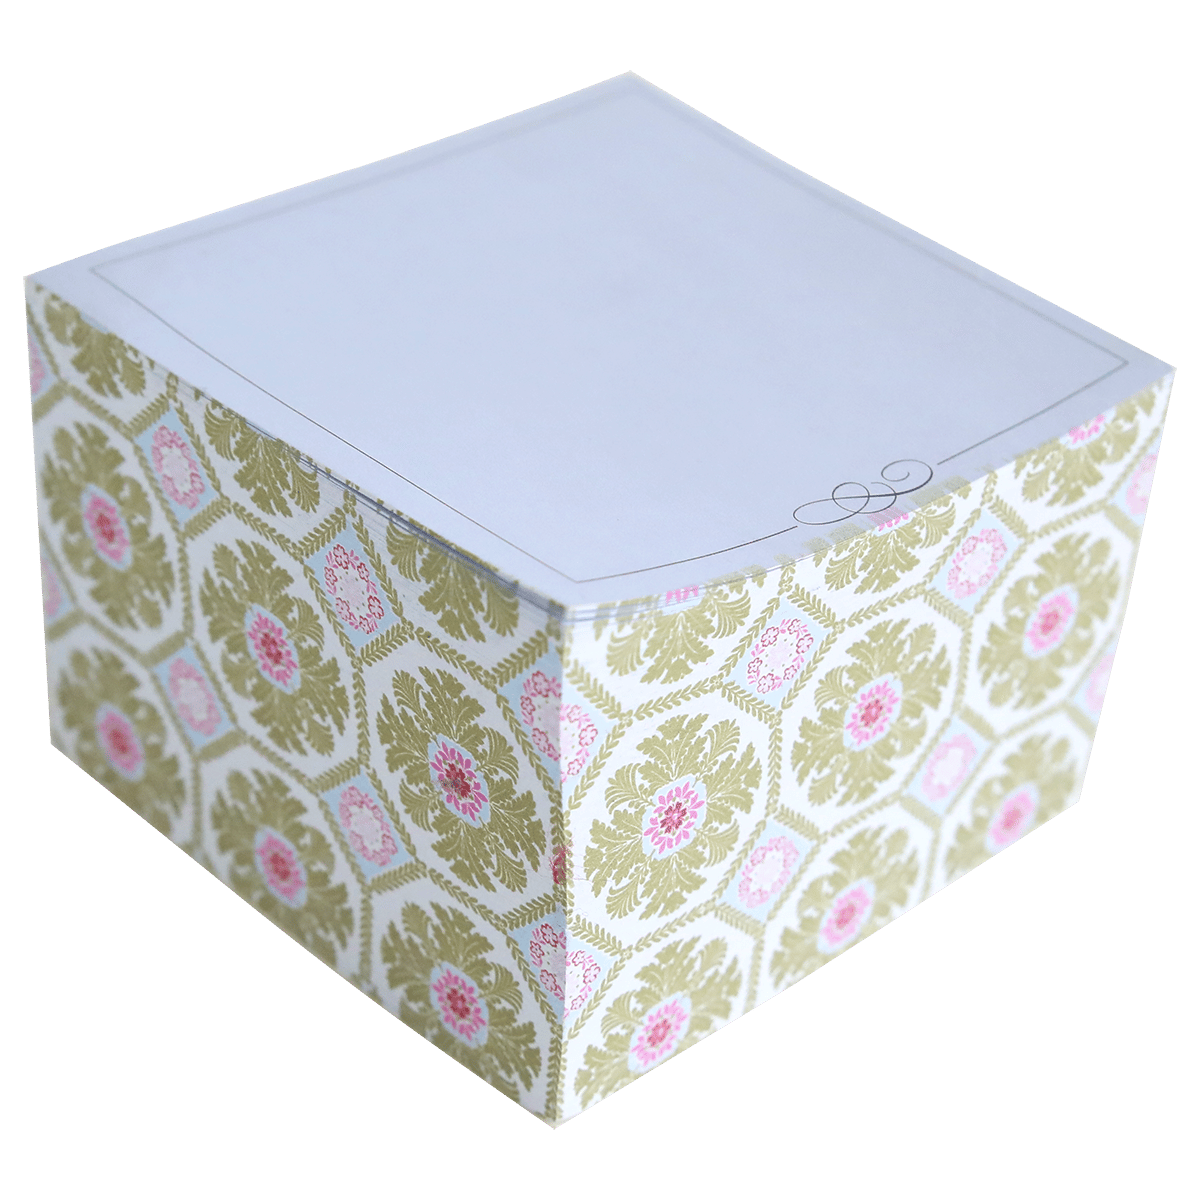 a white box with a pink and green pattern on it.